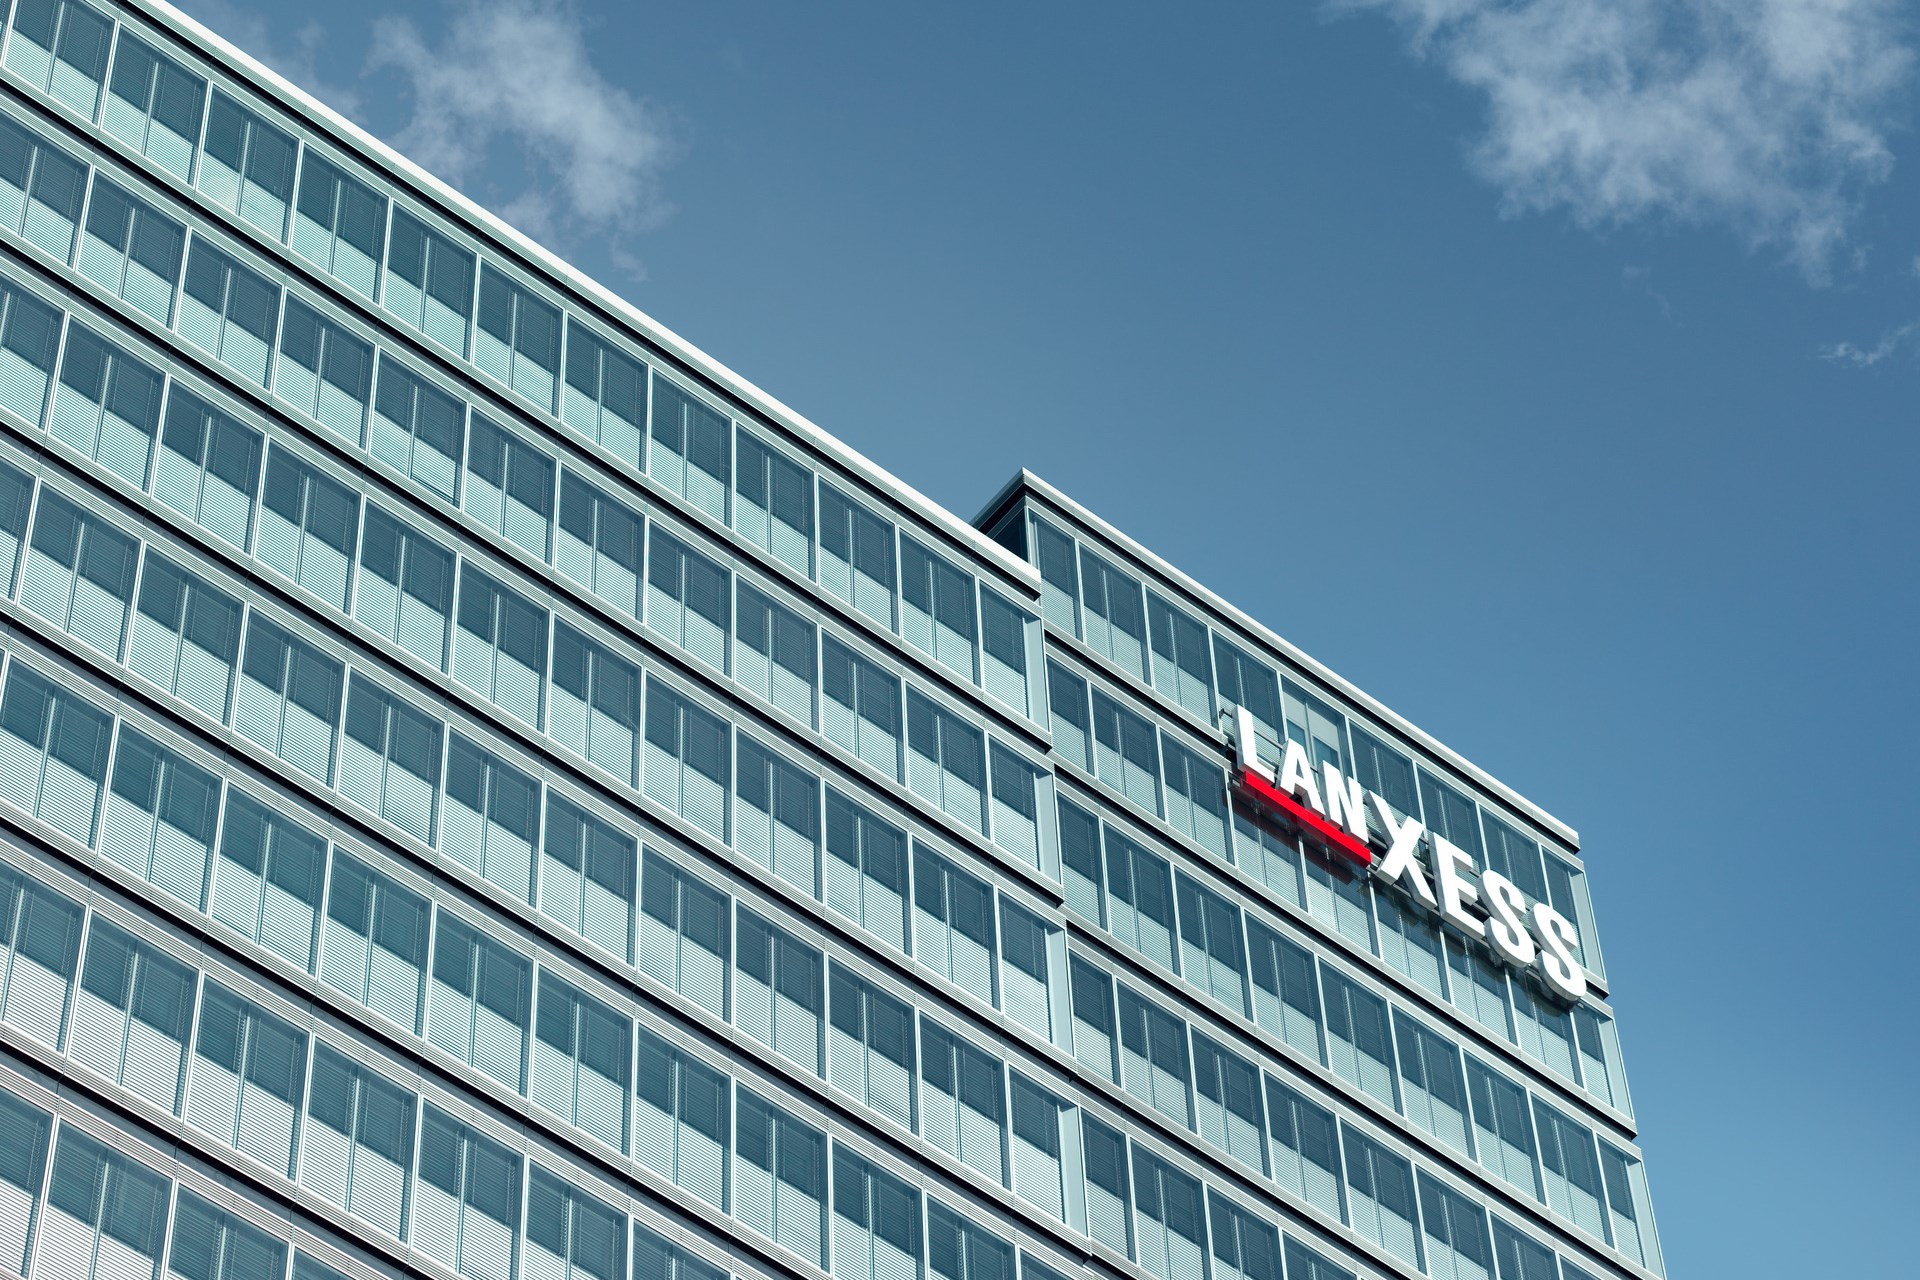 LANXESS Headquarters in Cologne